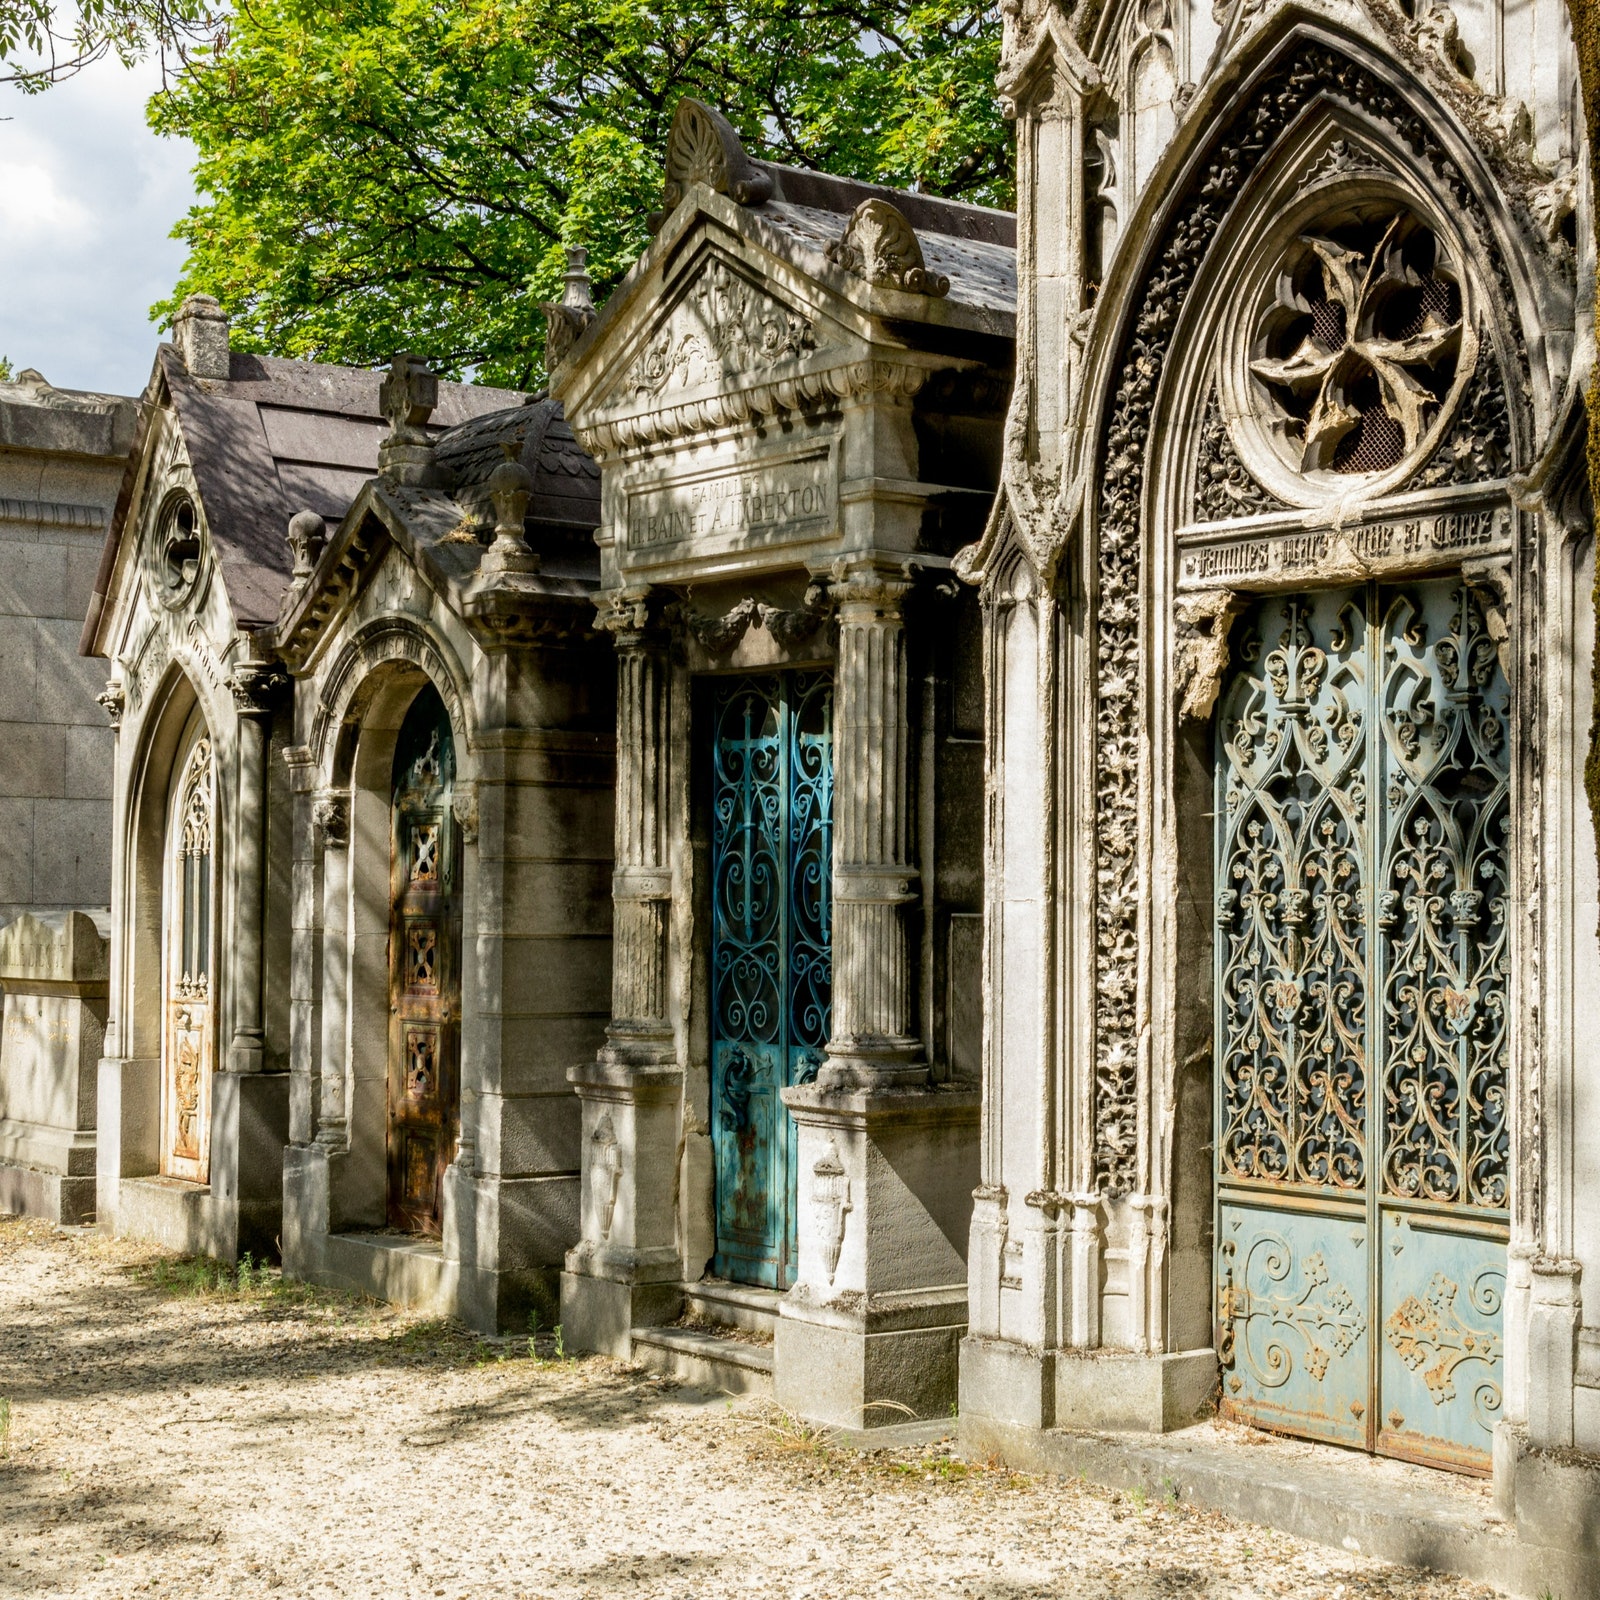 Tour of the famous Père Lachaise cemetery (by TouringBee) in France